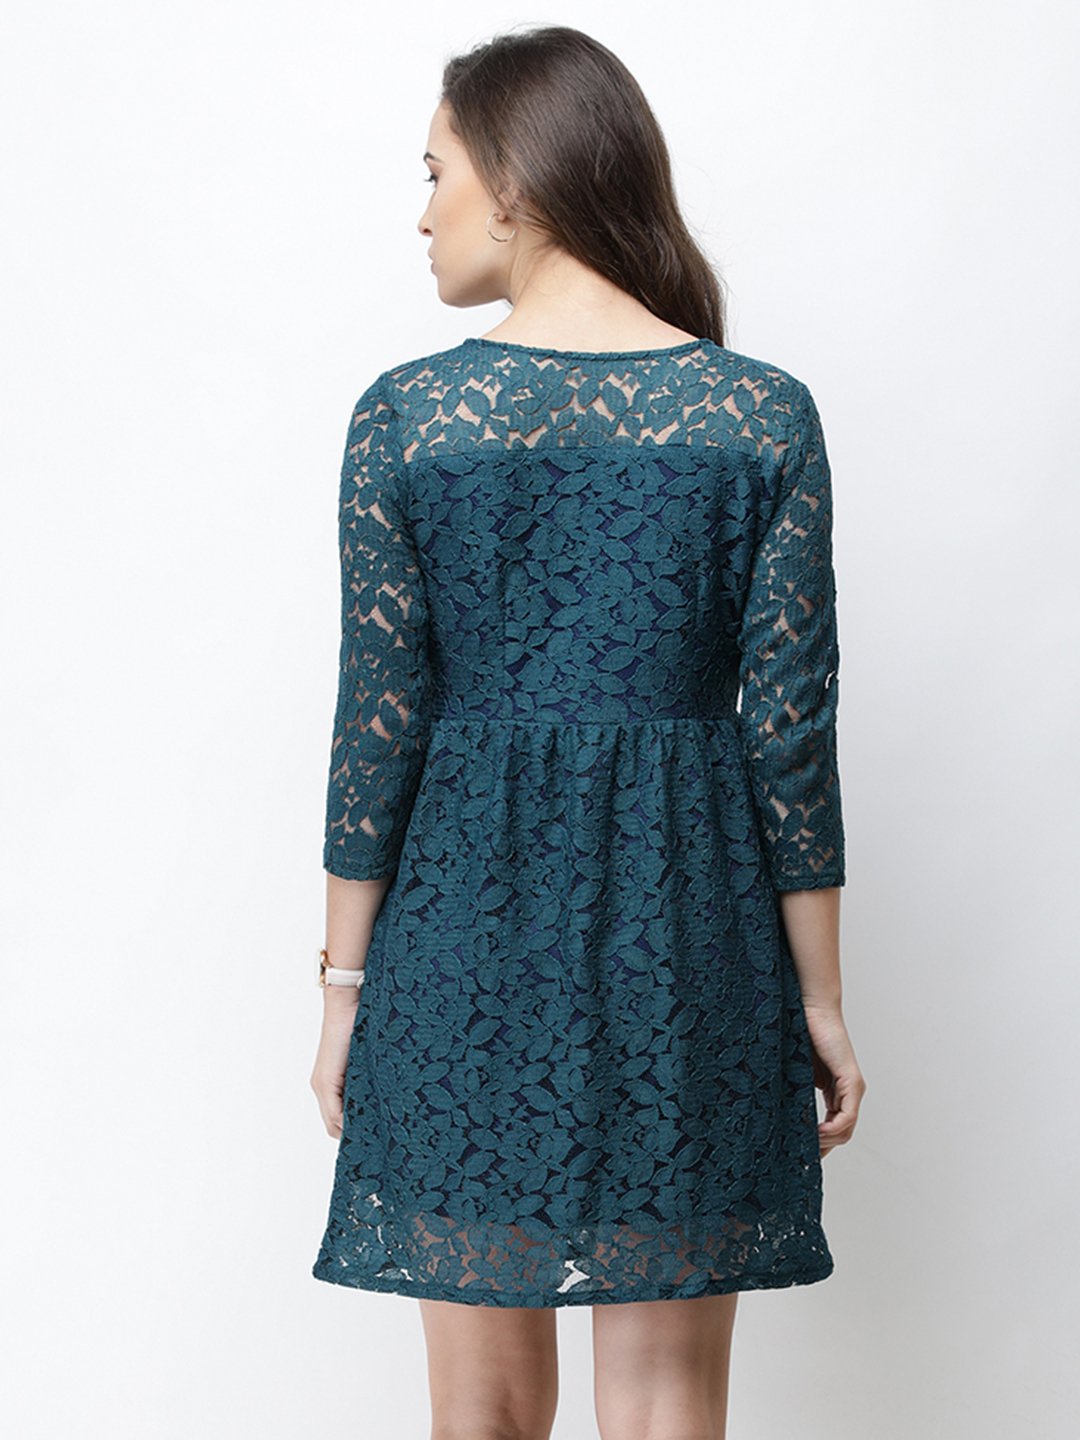 Cation Green Lace Dress